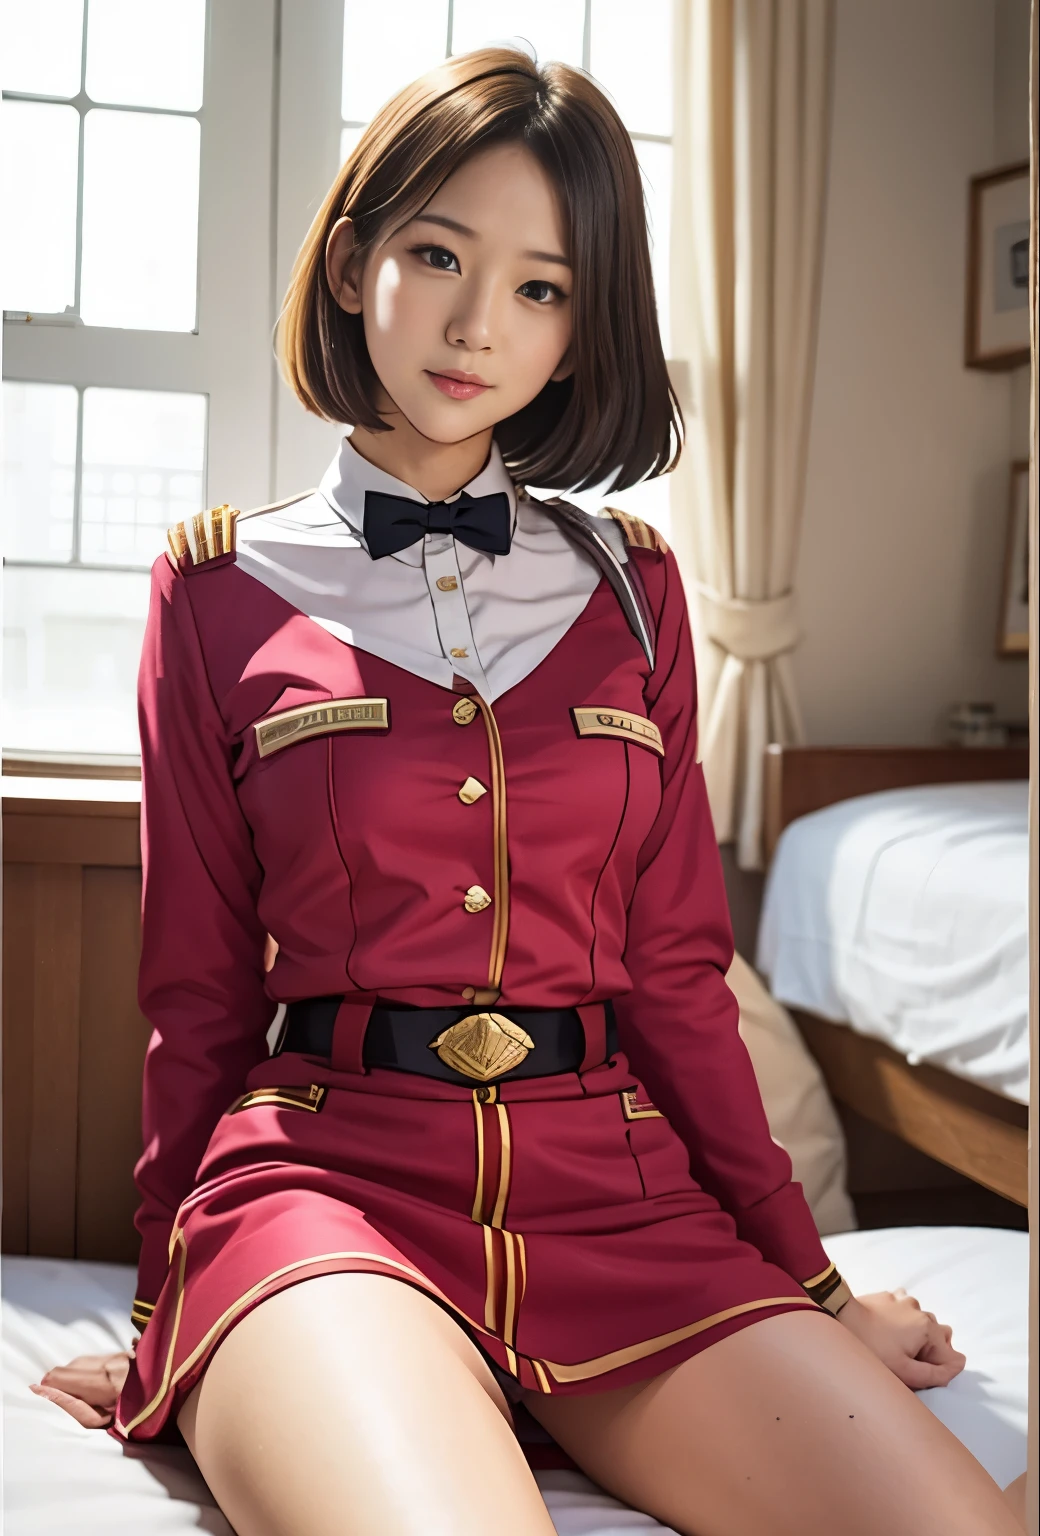 real photos、Highest imAge quality、real imAge、federal army uniform miniskirt、16Age日本人女性、Mrs Bow、cute girl、Her white panties are completely visible、1６Age、（white panties:1.3）、super mini skirt、beautiful thighs、white panties、Her red mini skirt flips up, revealing her white panties